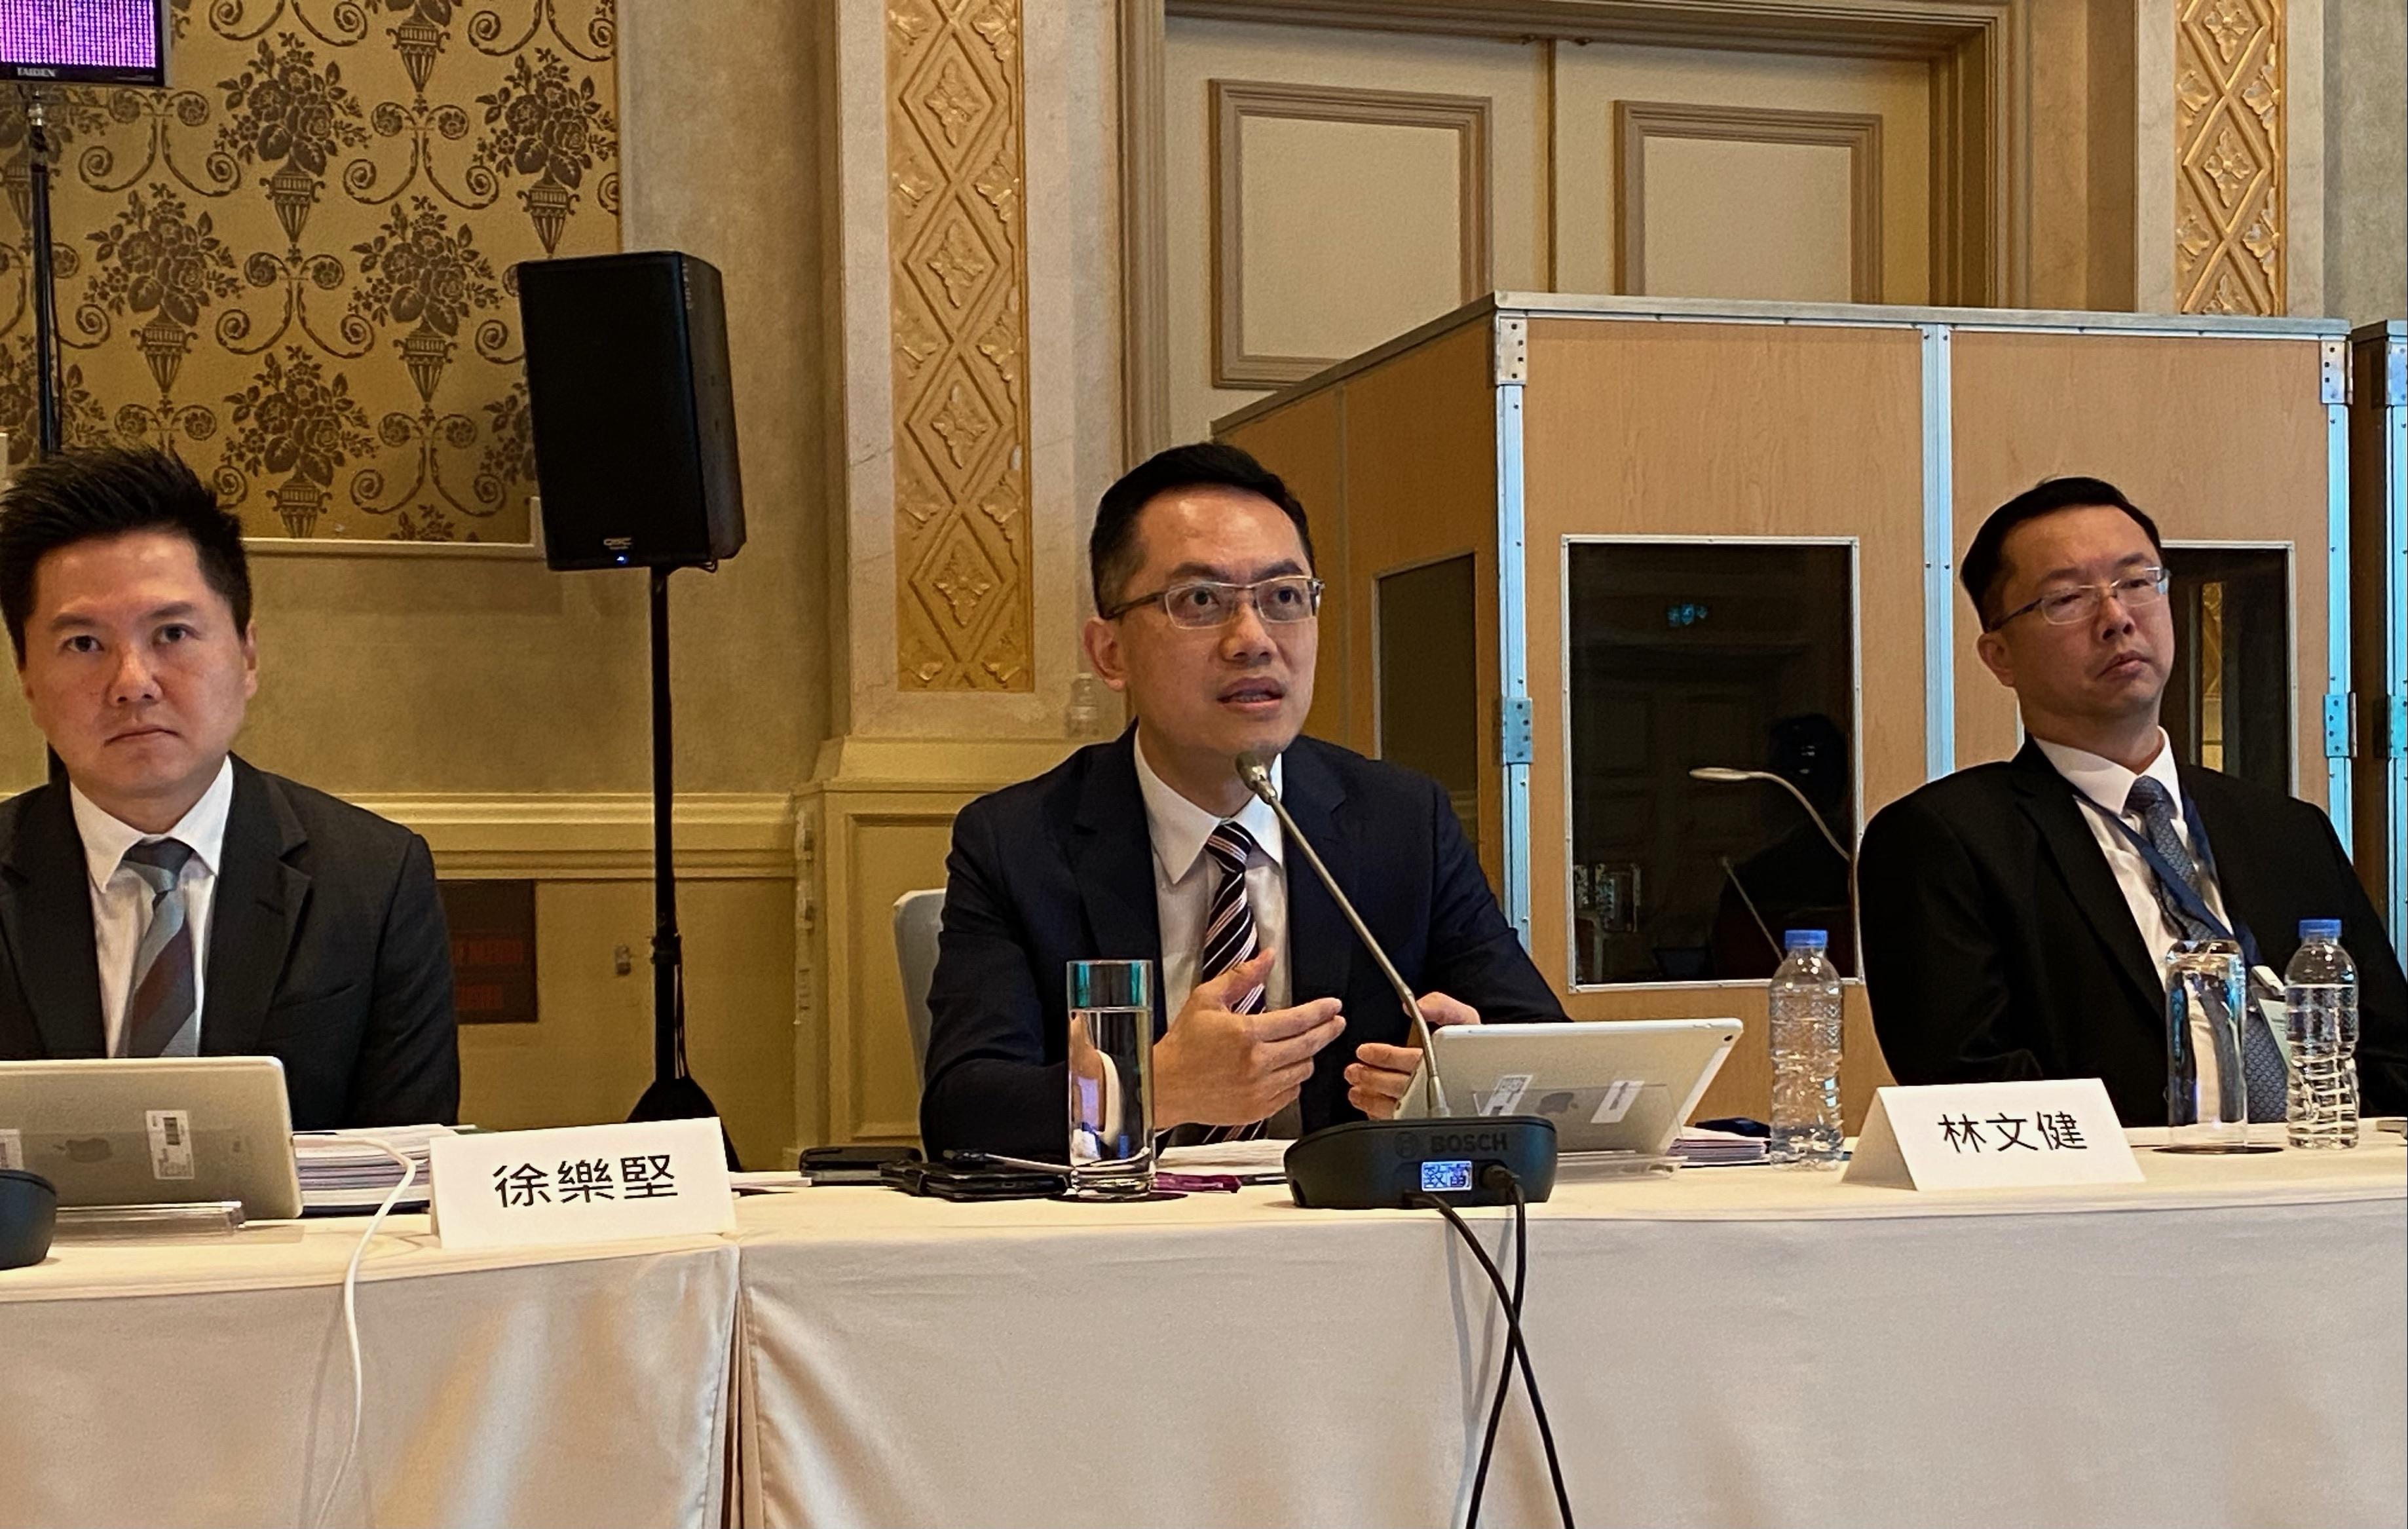 The two-day 20th Tripartite Meeting on Prevention and Control of Communicable Diseases successfully concluded in Macao today (April 21). Photo shows the Director of Health, Dr Ronald Lam (centre), speaking at the meeting.